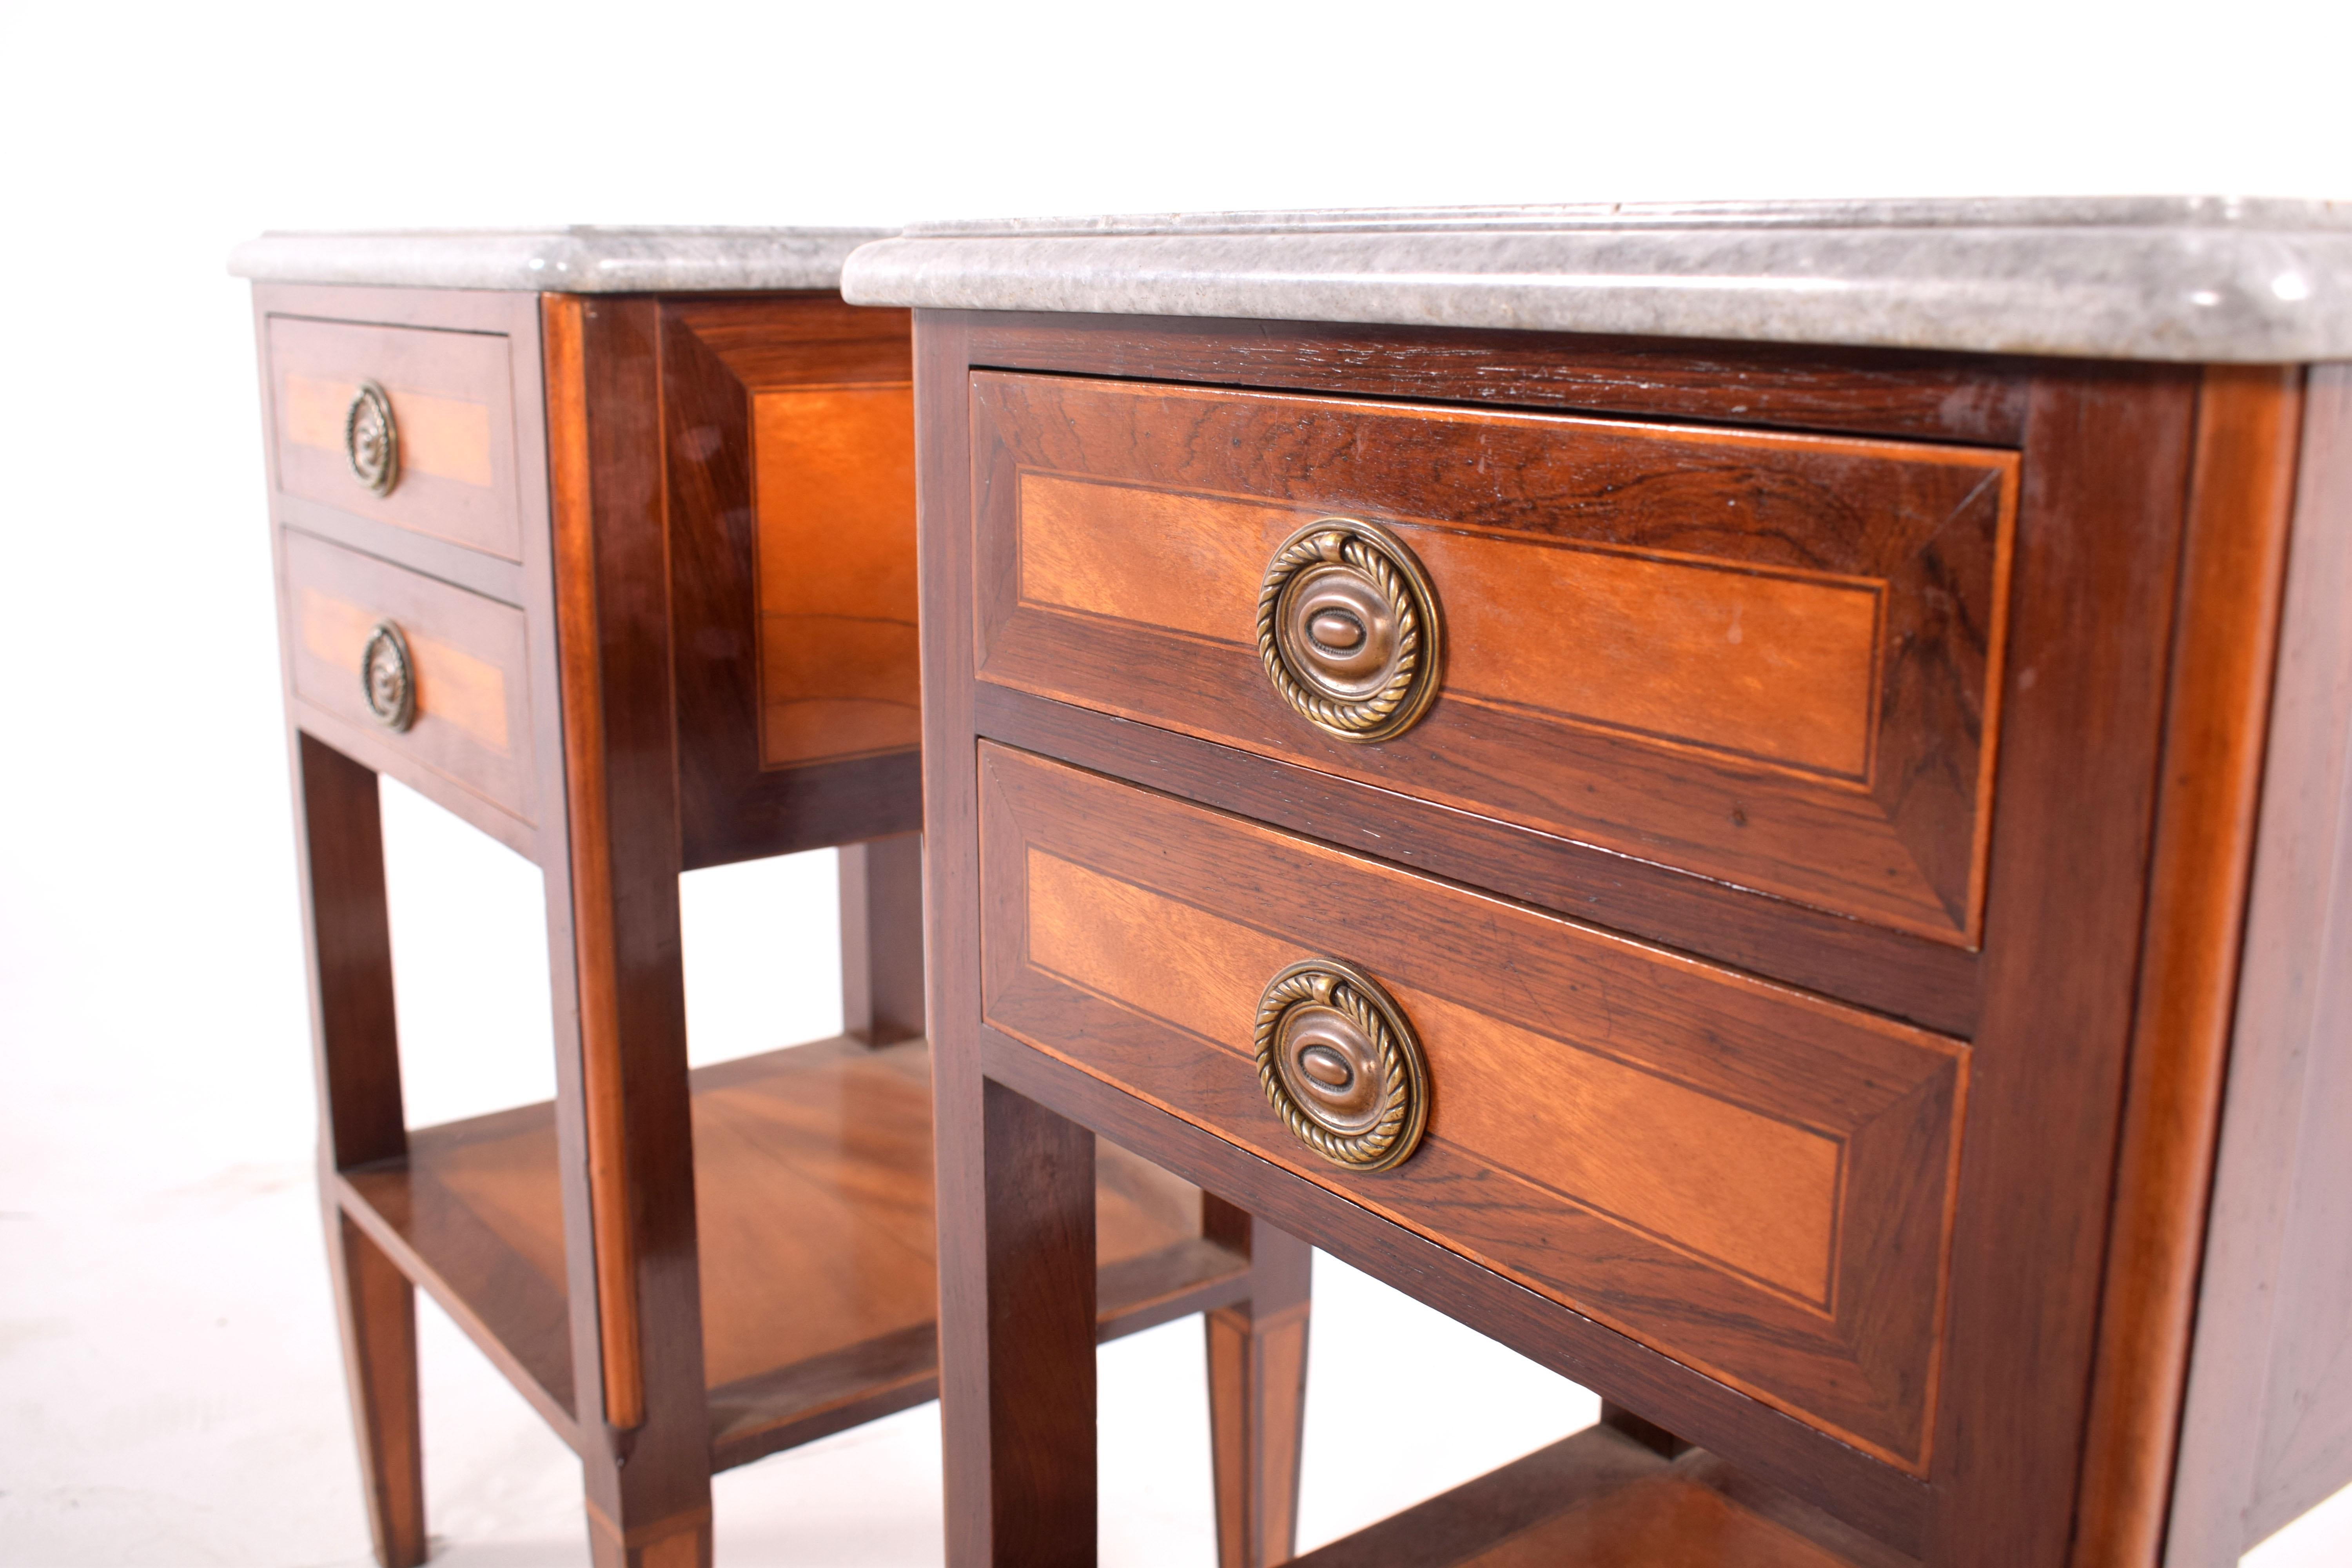 Other Portuguese Pair of Bedside Tables, D. Maria Style